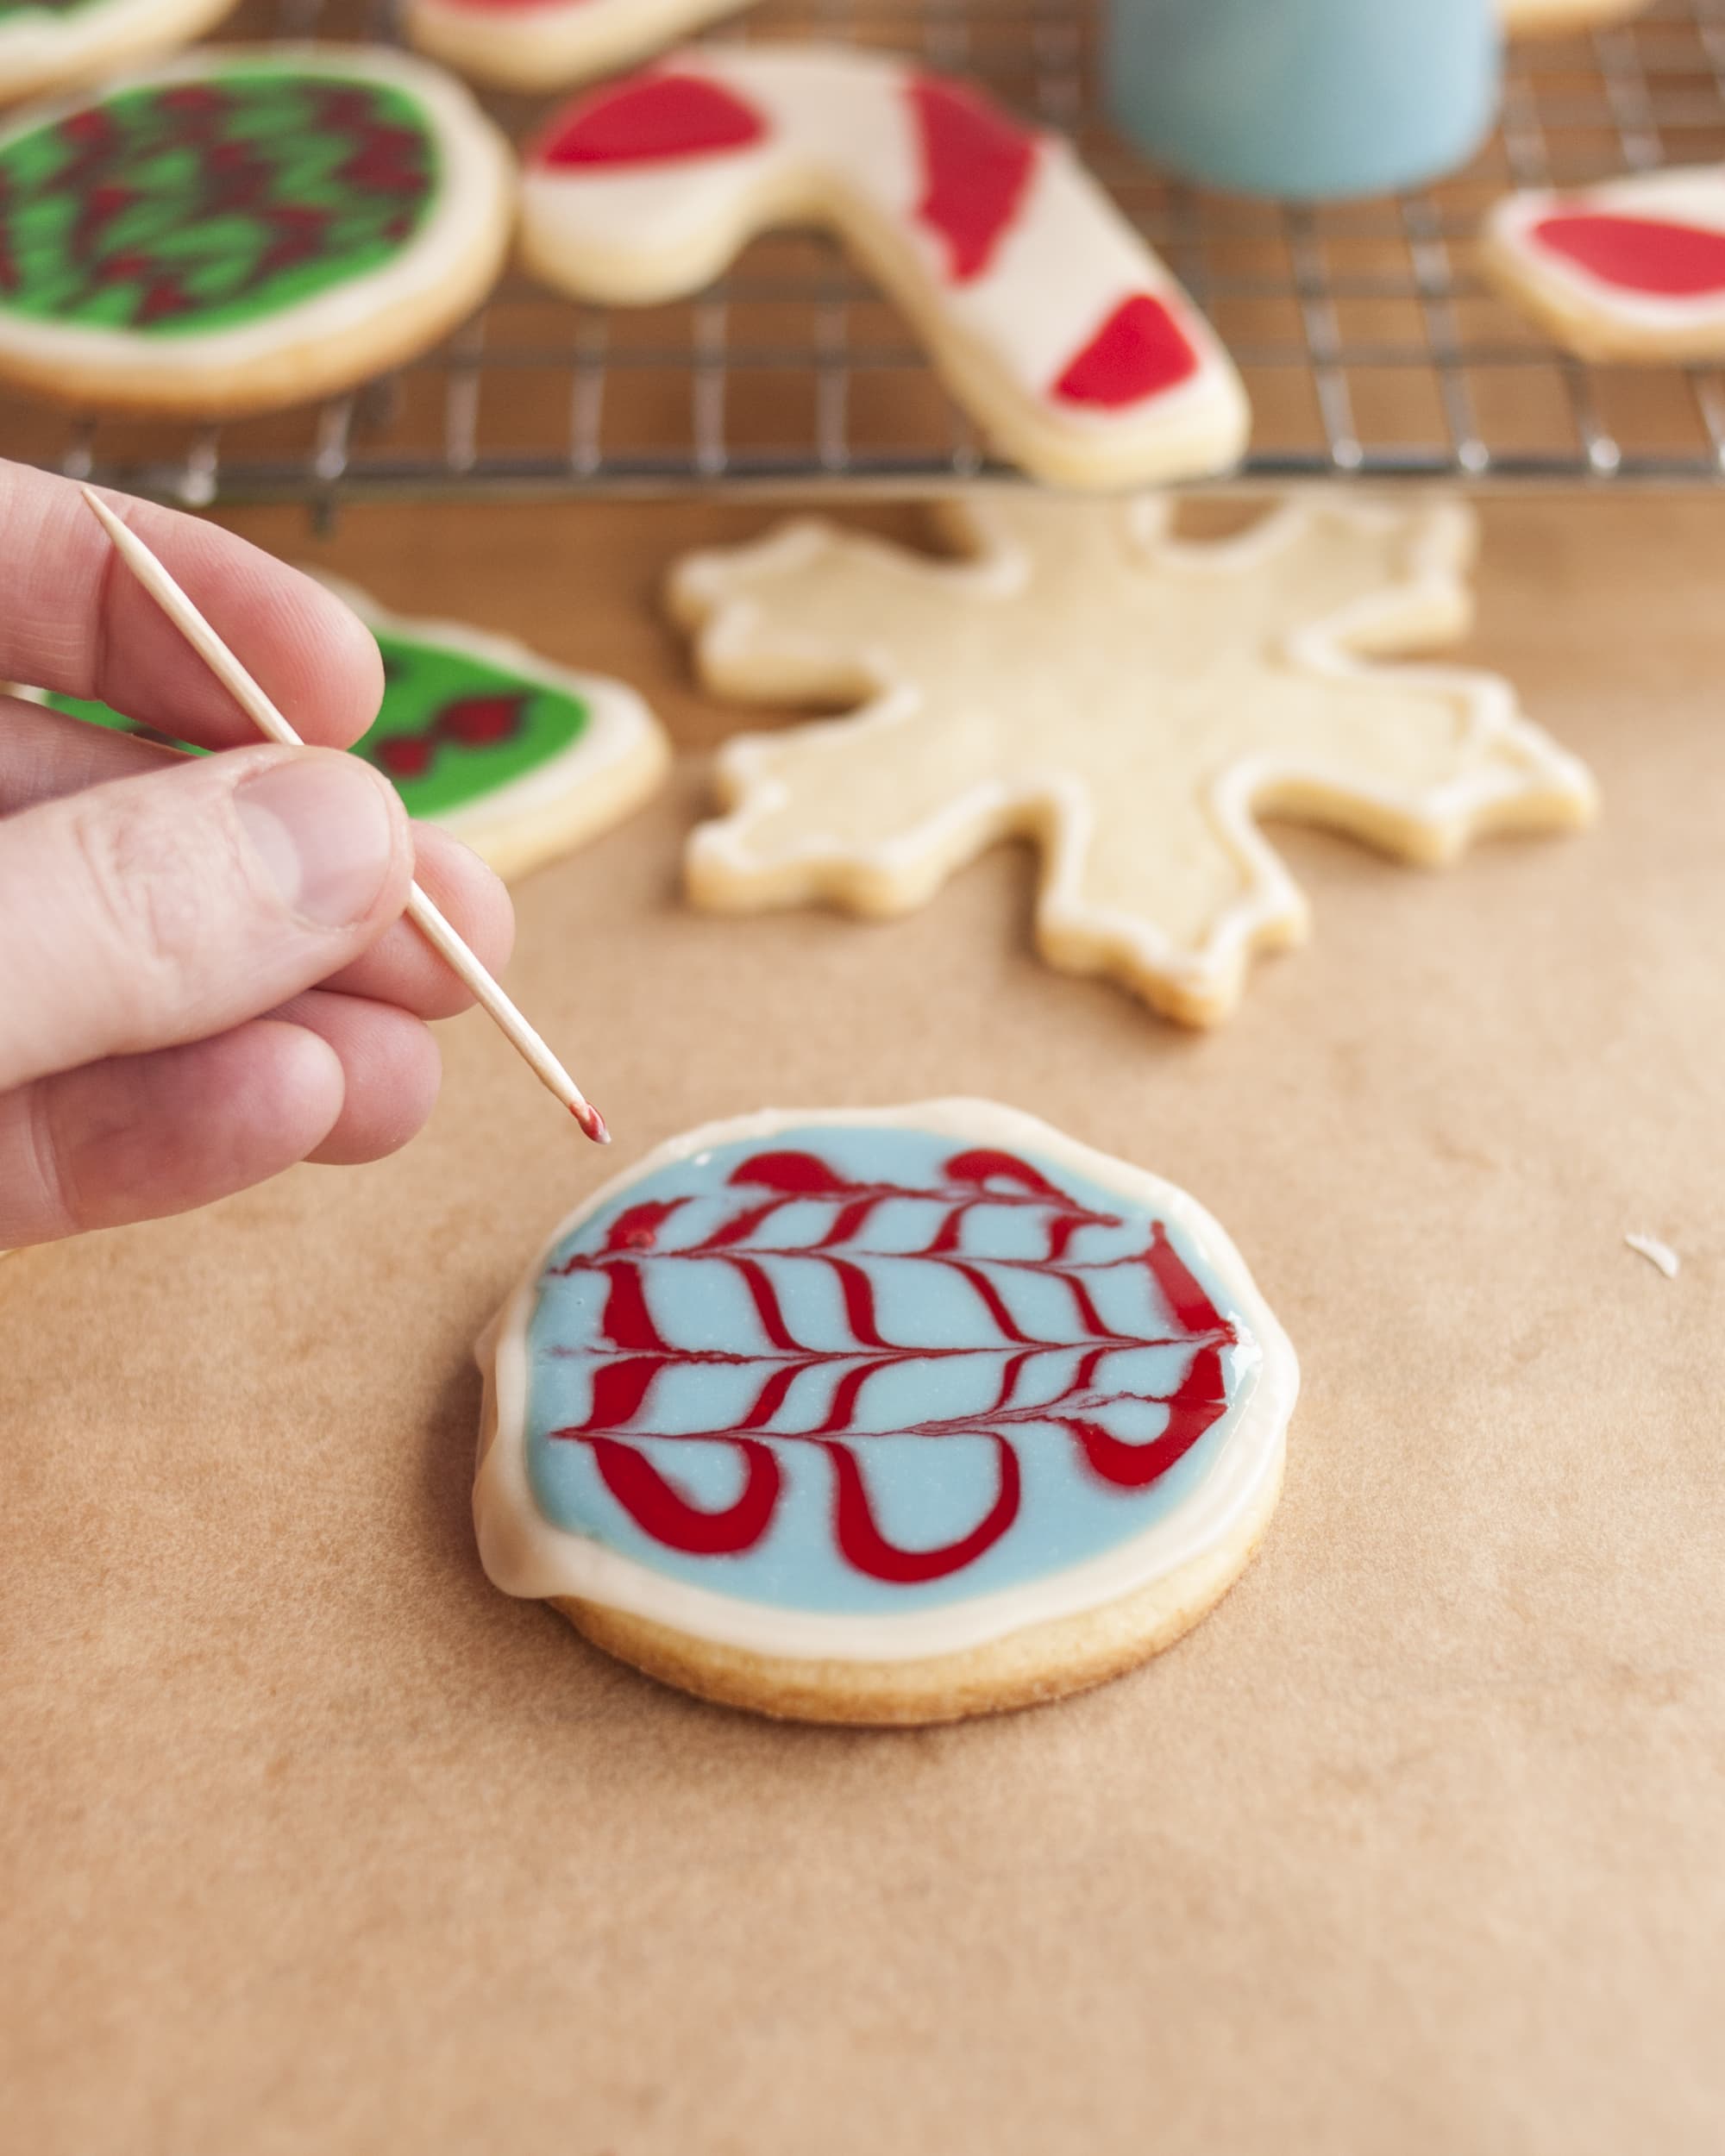 How To Create a Marbled Effect When Decorating Cookies